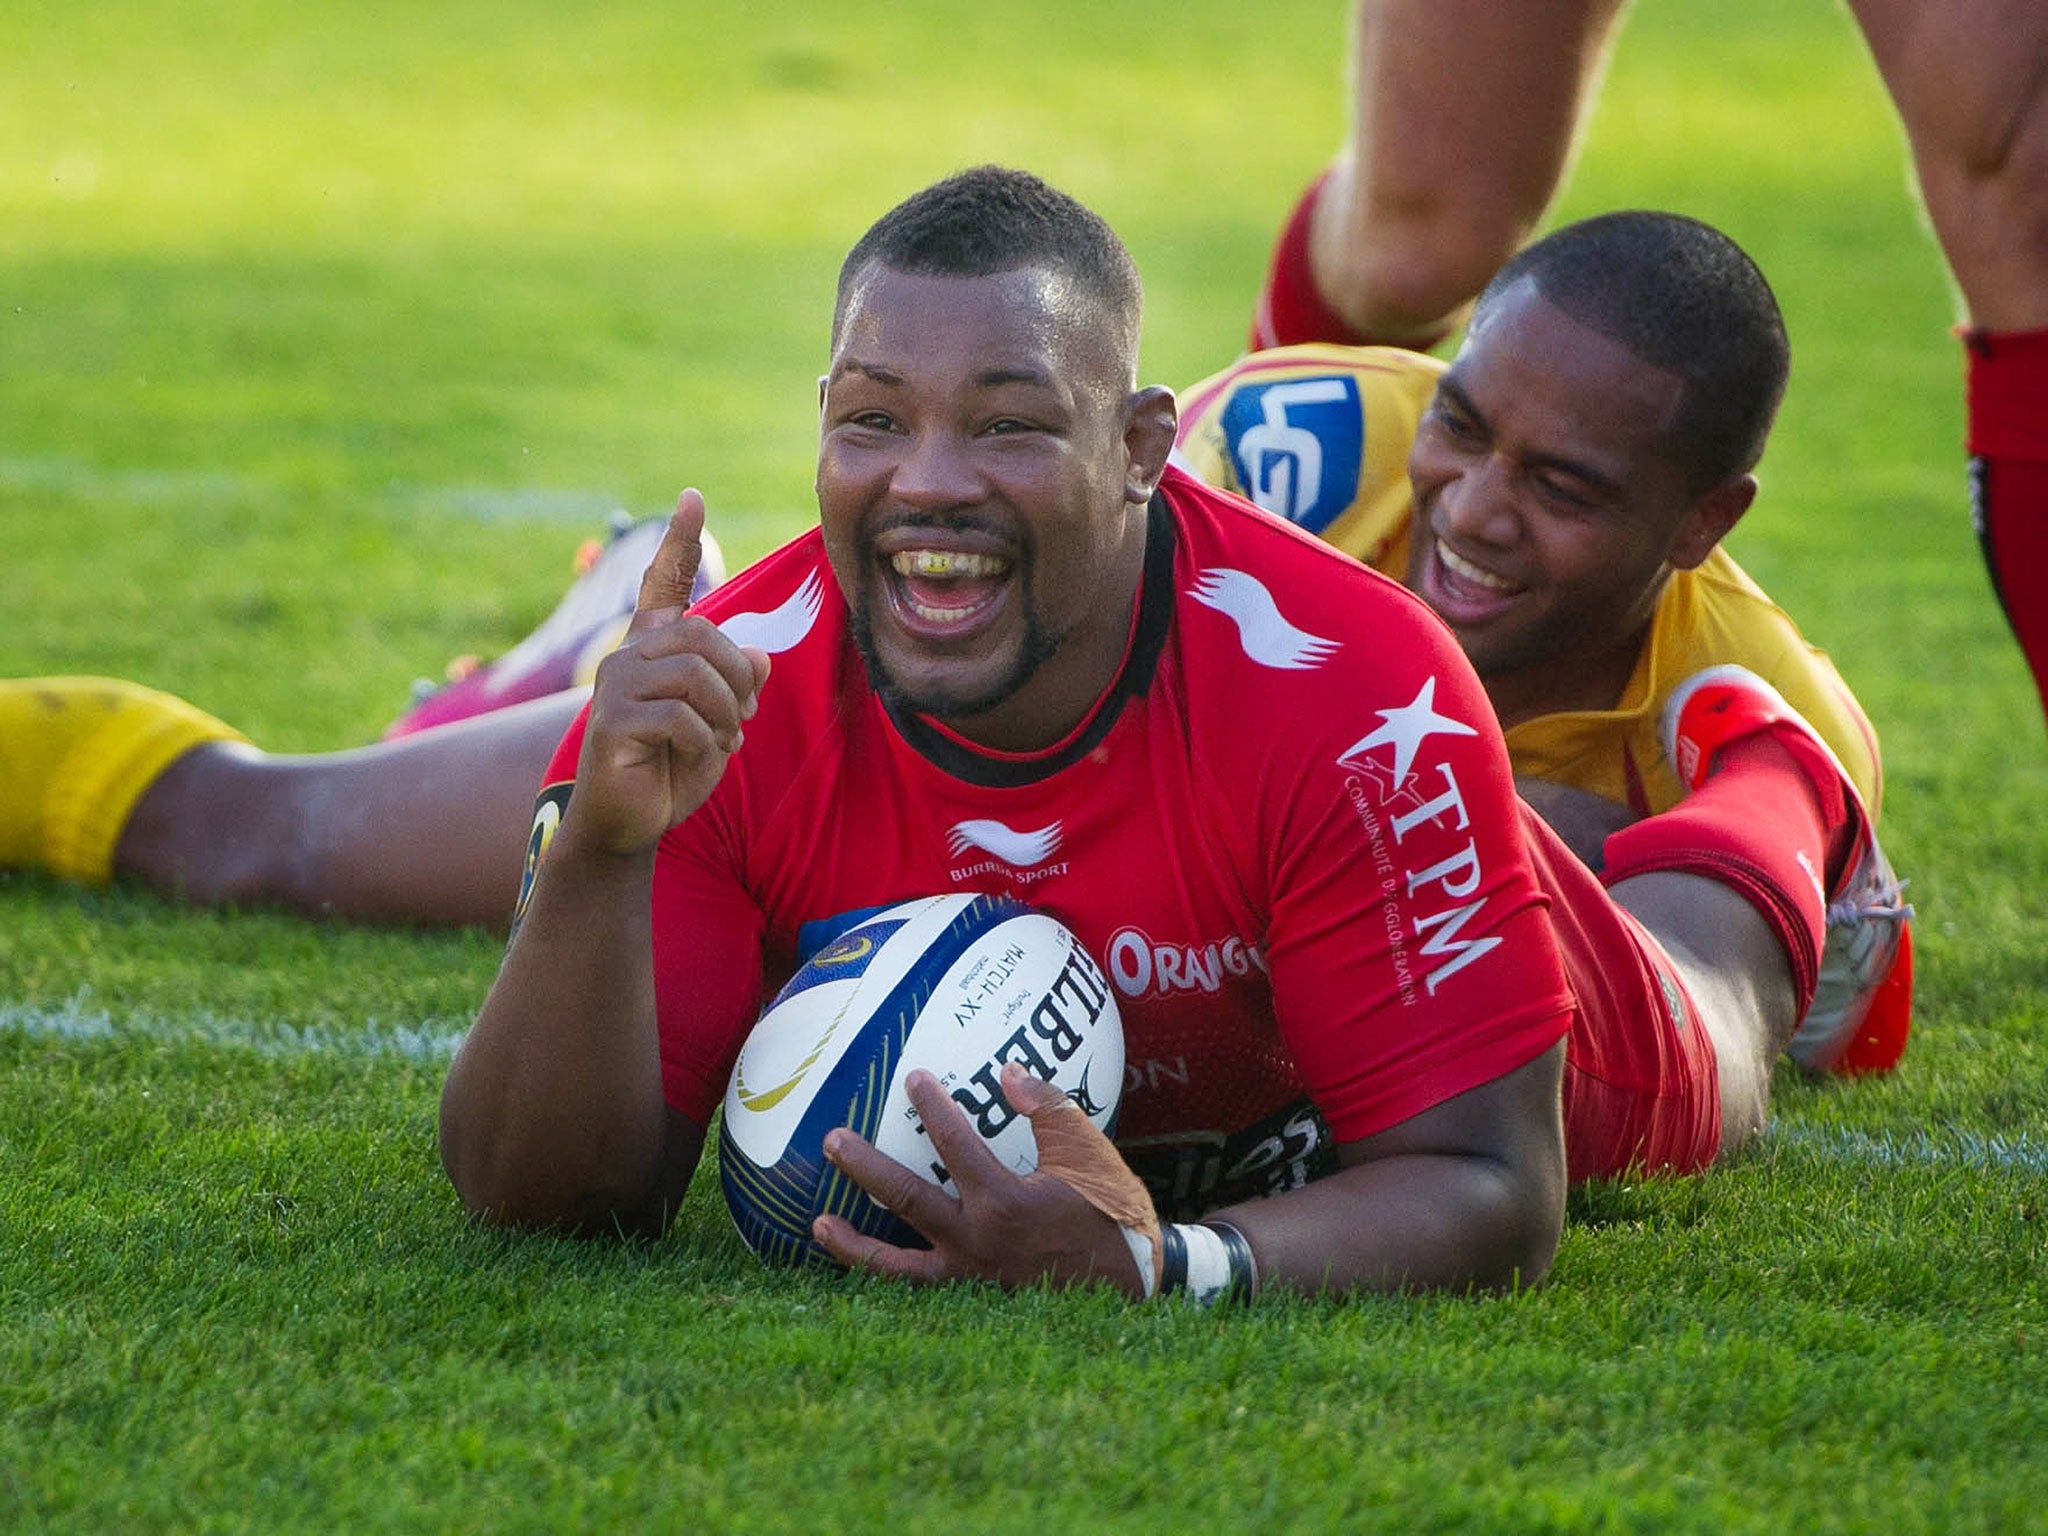 Steffon Armitage remains determined to play for England again